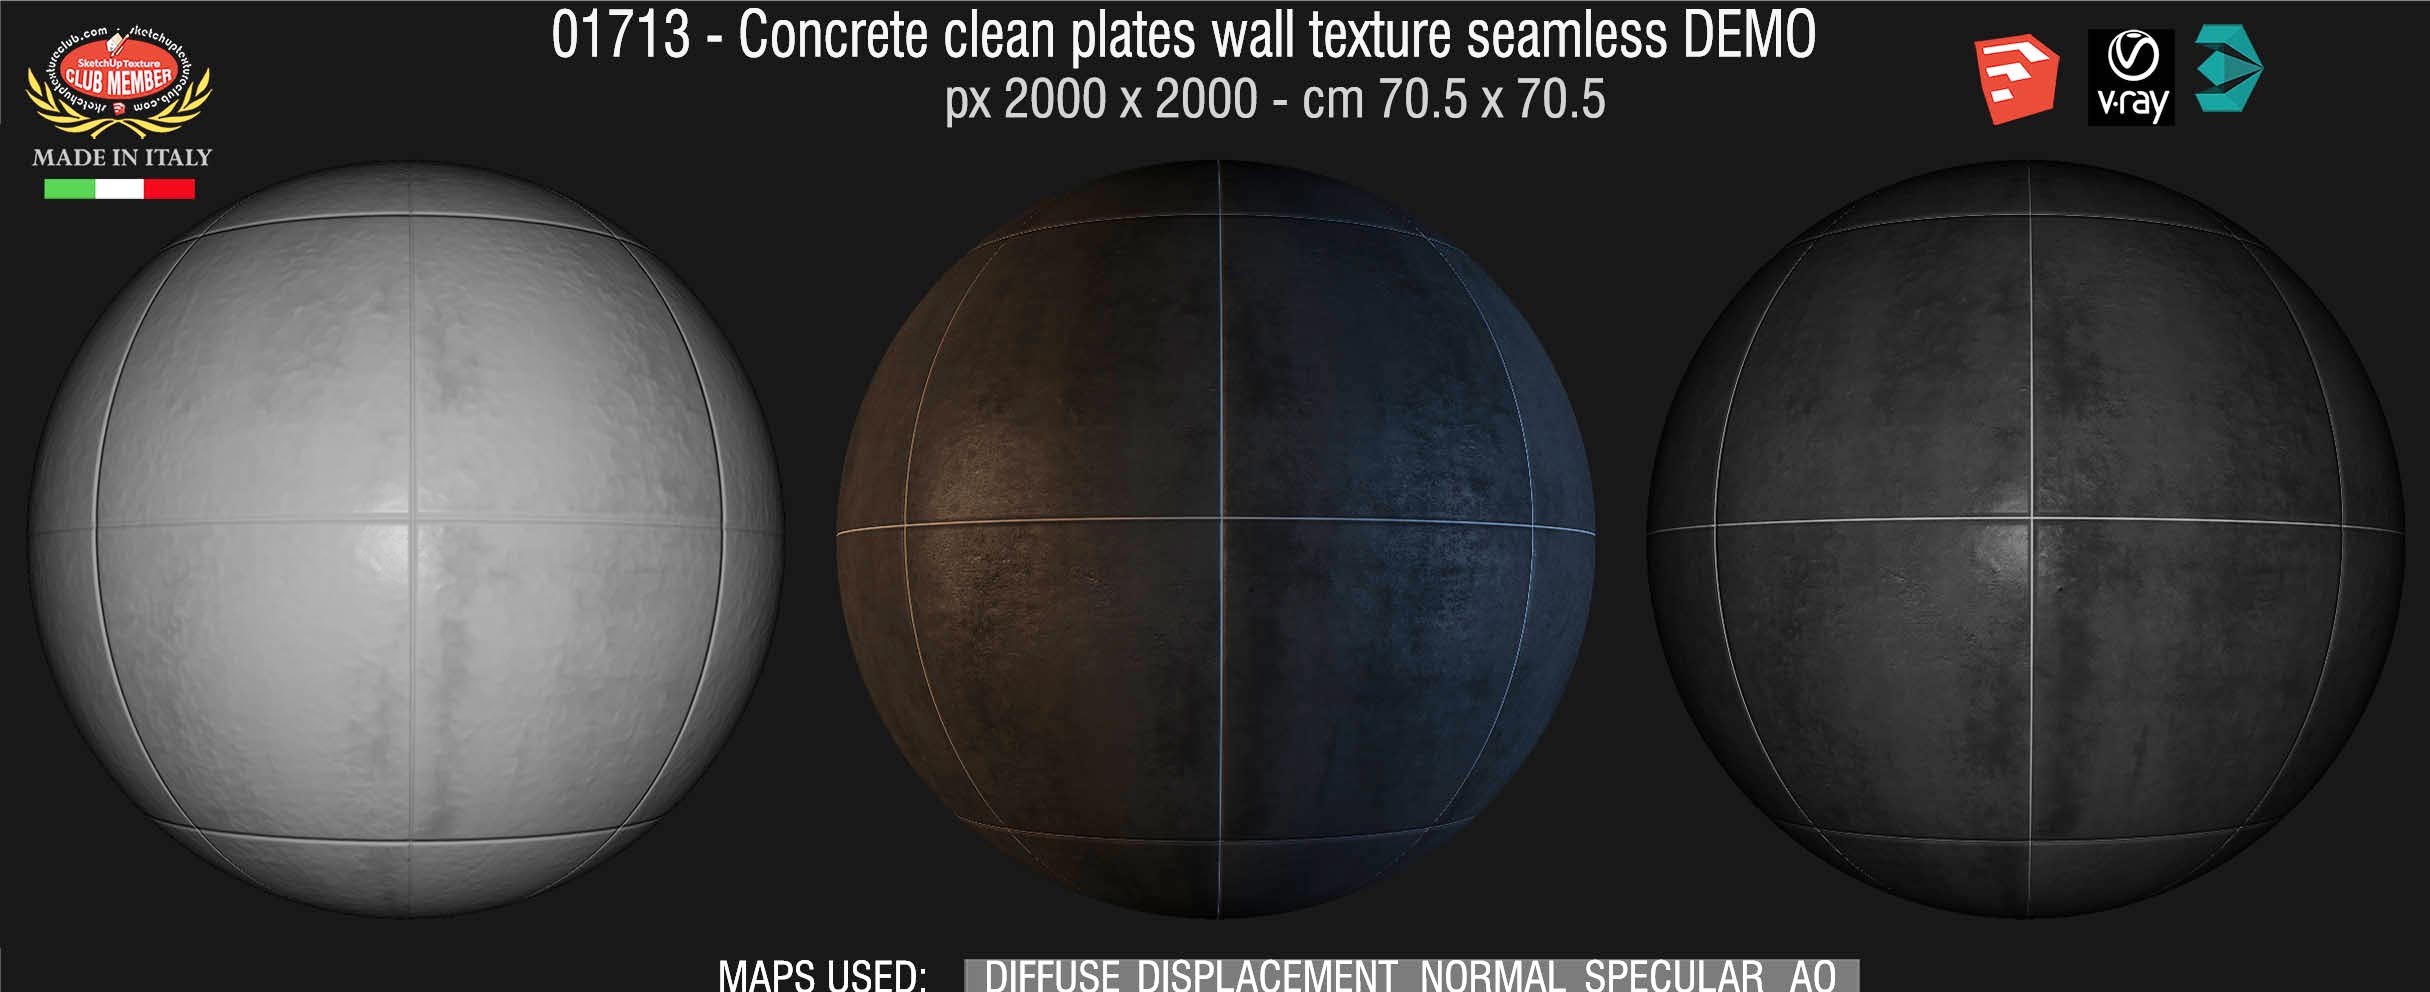 01713 Concrete clean plates wall texture seamless + maps DEMO